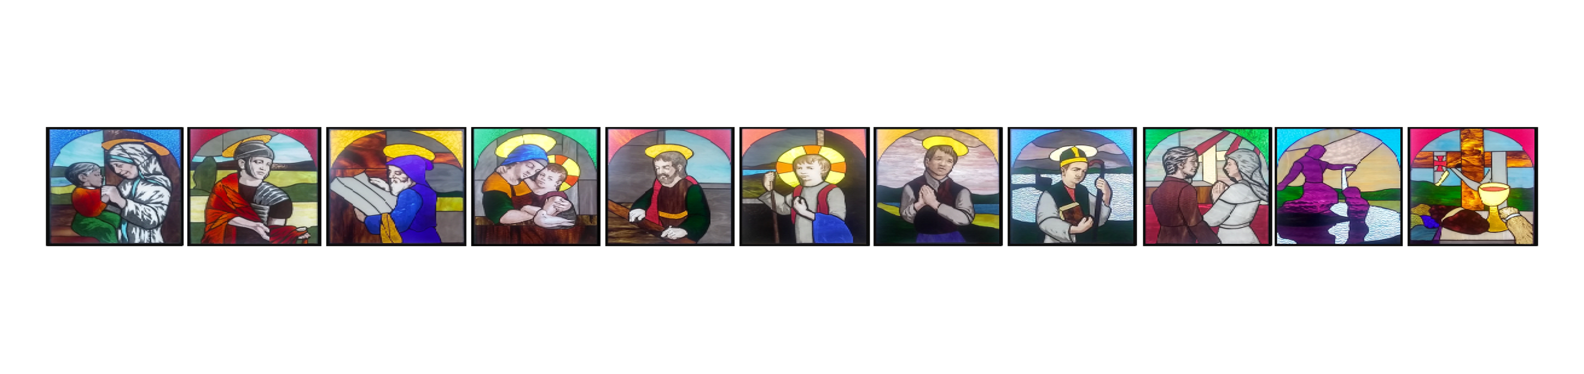 stained glass windows banner